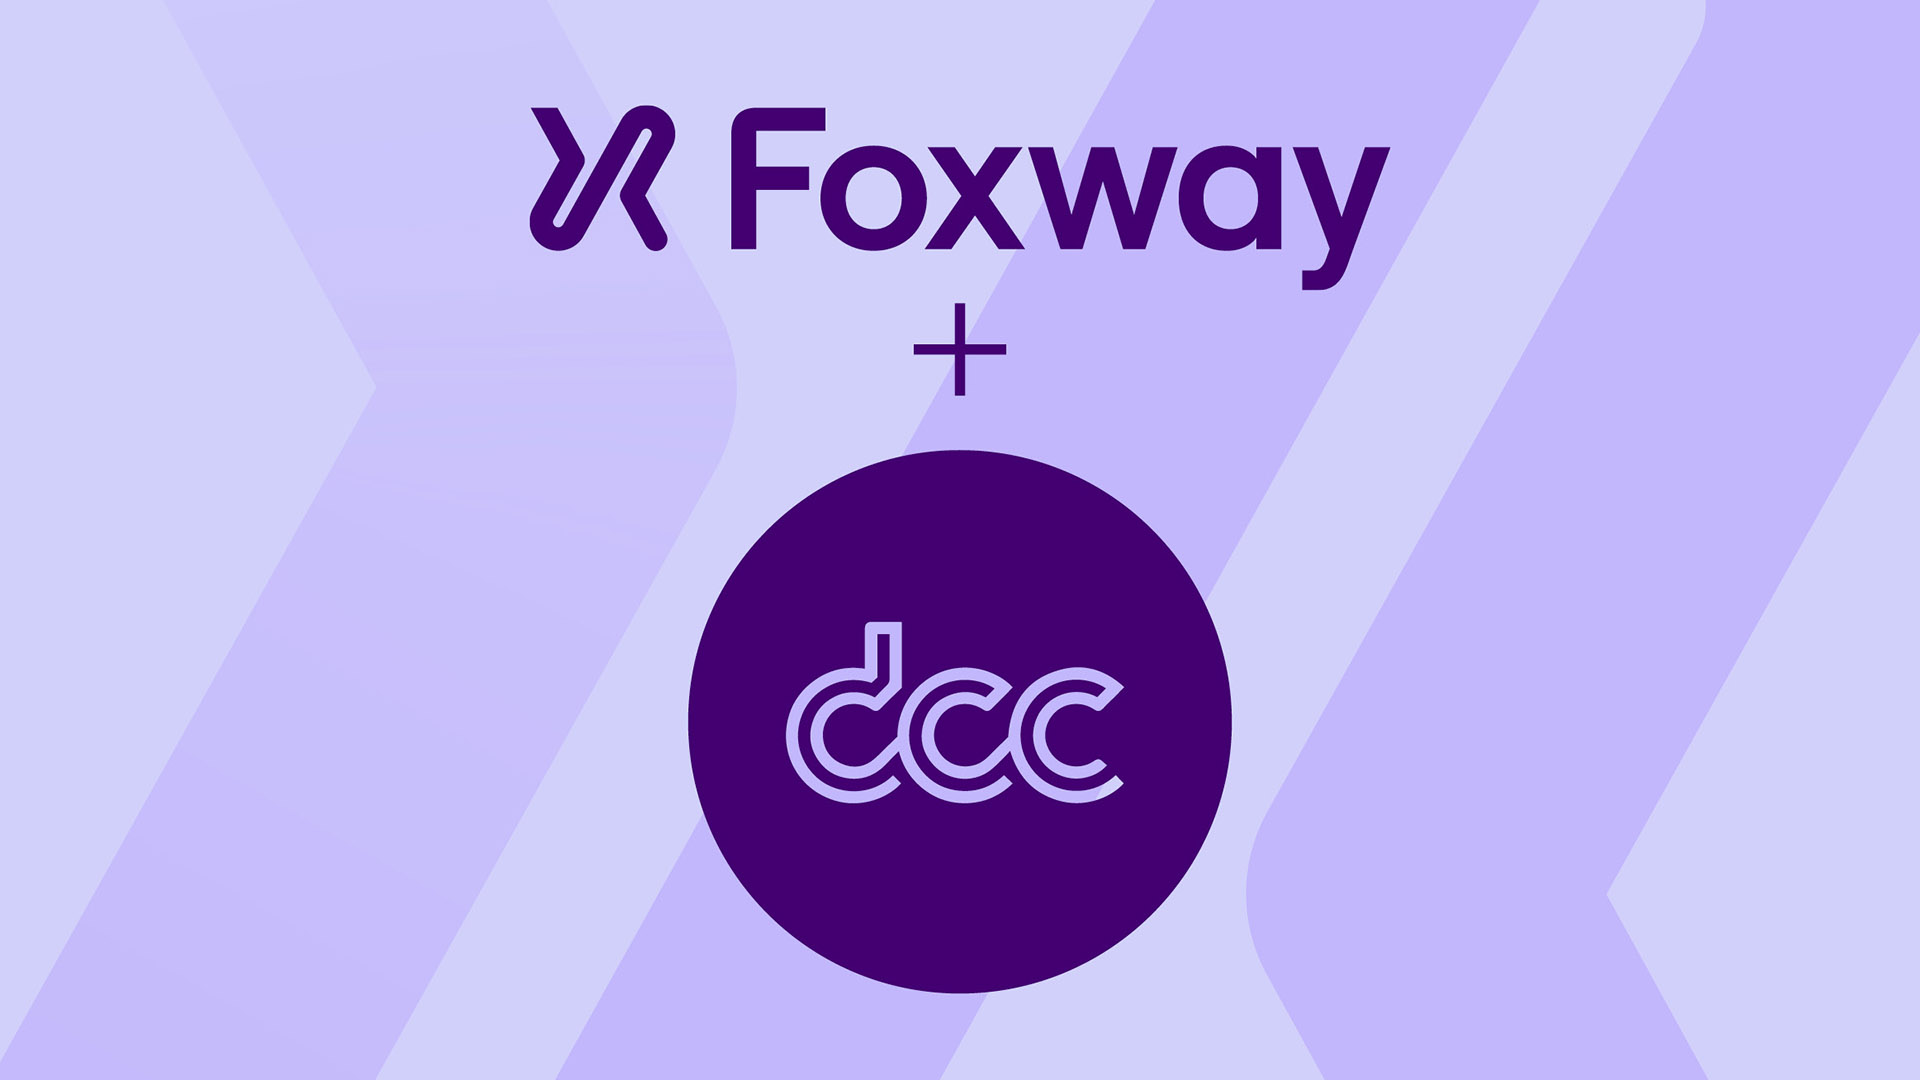 Foxway acquires DCC and strengthens its position in the Danish market - Foxway